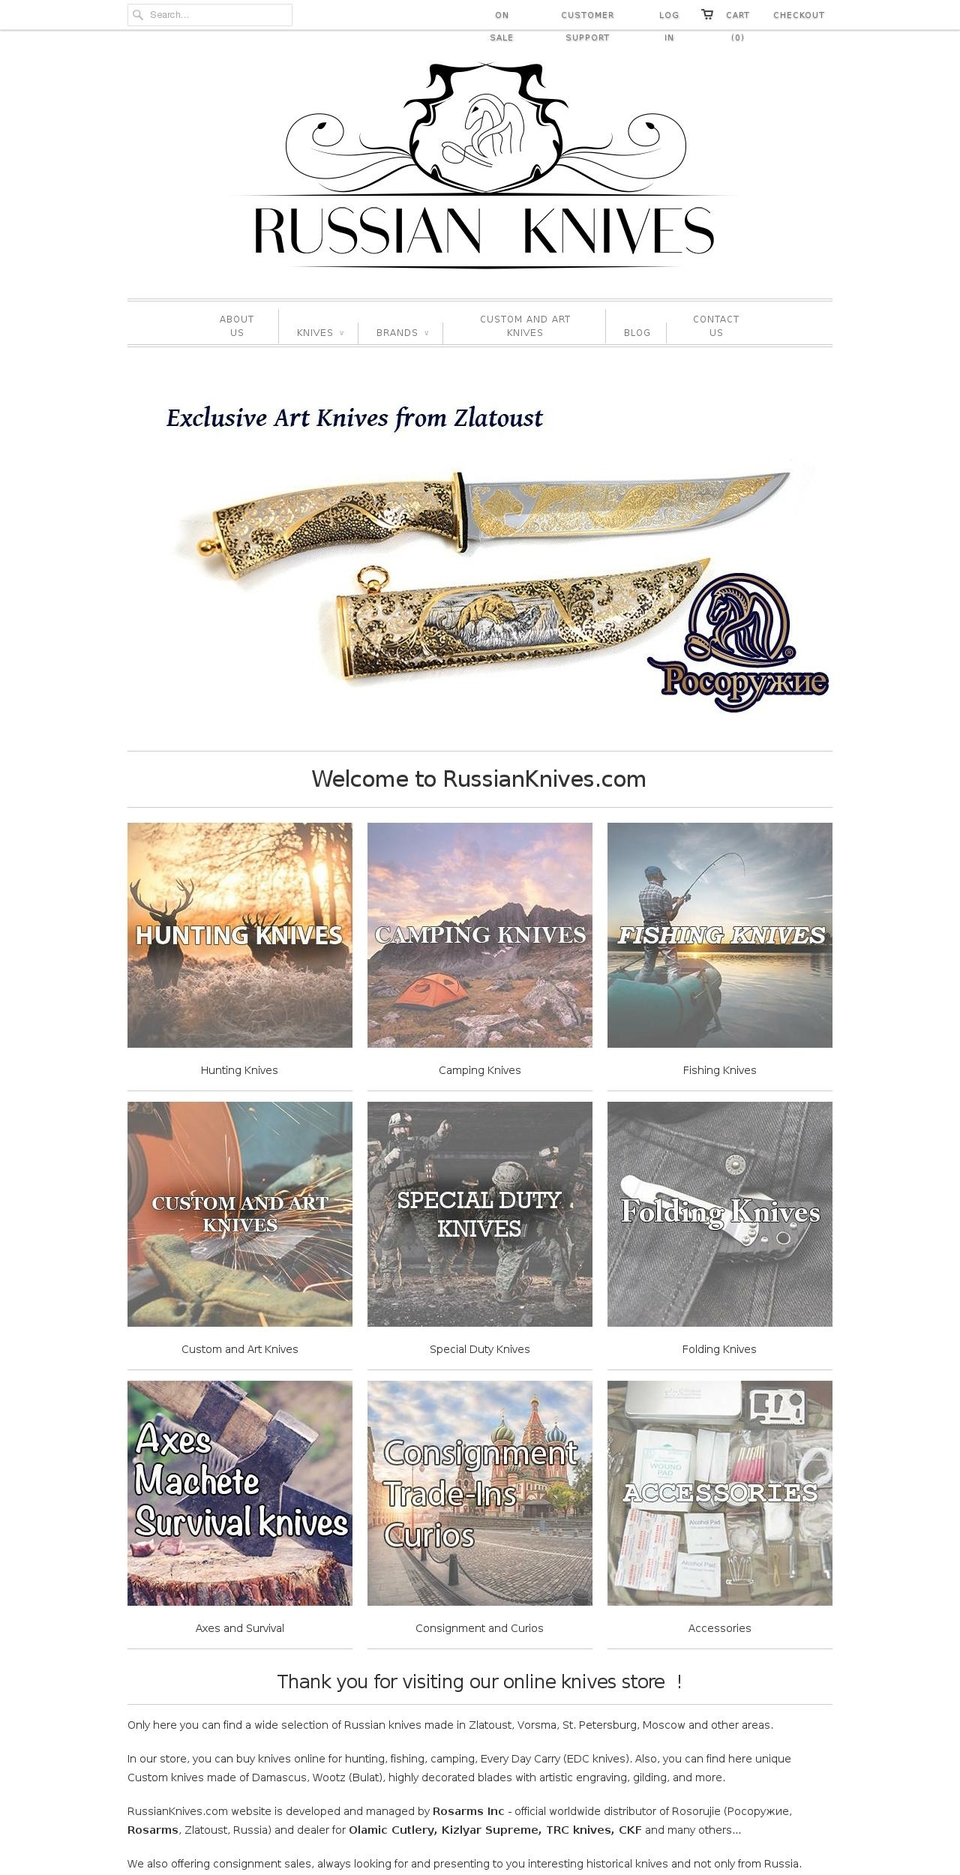 Responsive Shopify theme site example russianknives.com